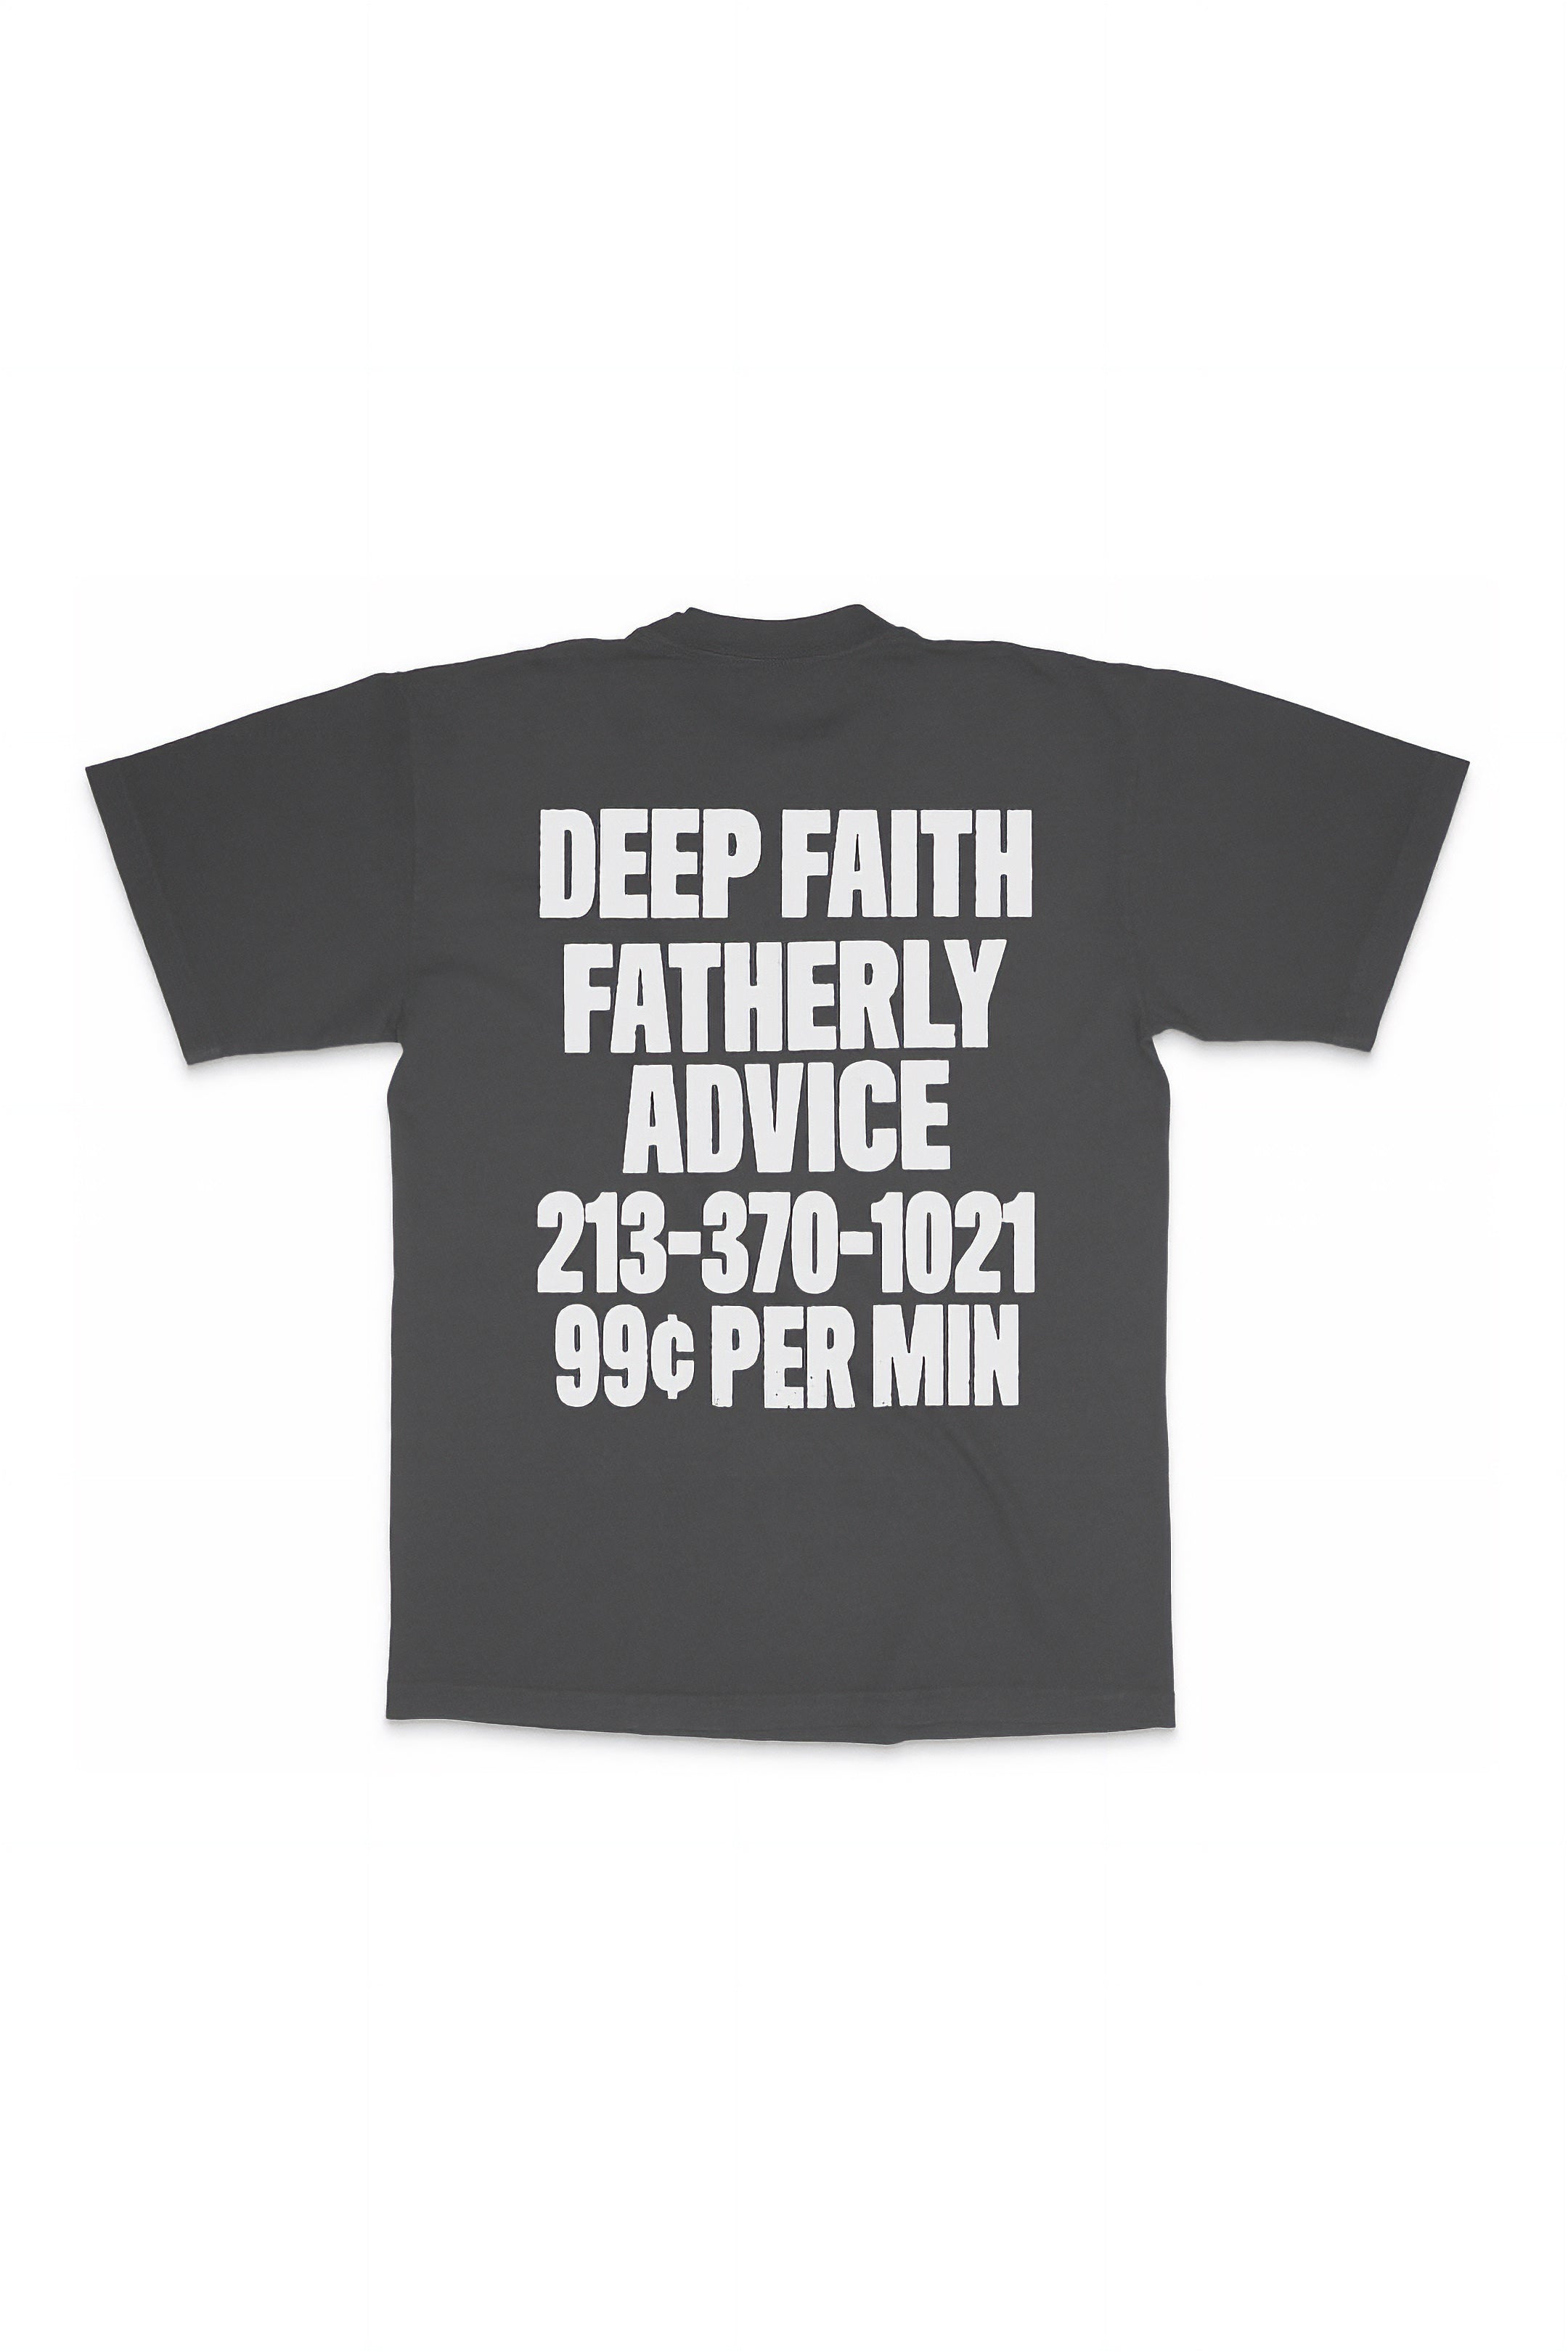 The DEEP FAITH x TOTAL LUXURY SPA - DADDY MERCH TEE  available online with global shipping, and in PAM Stores Melbourne and Sydney.